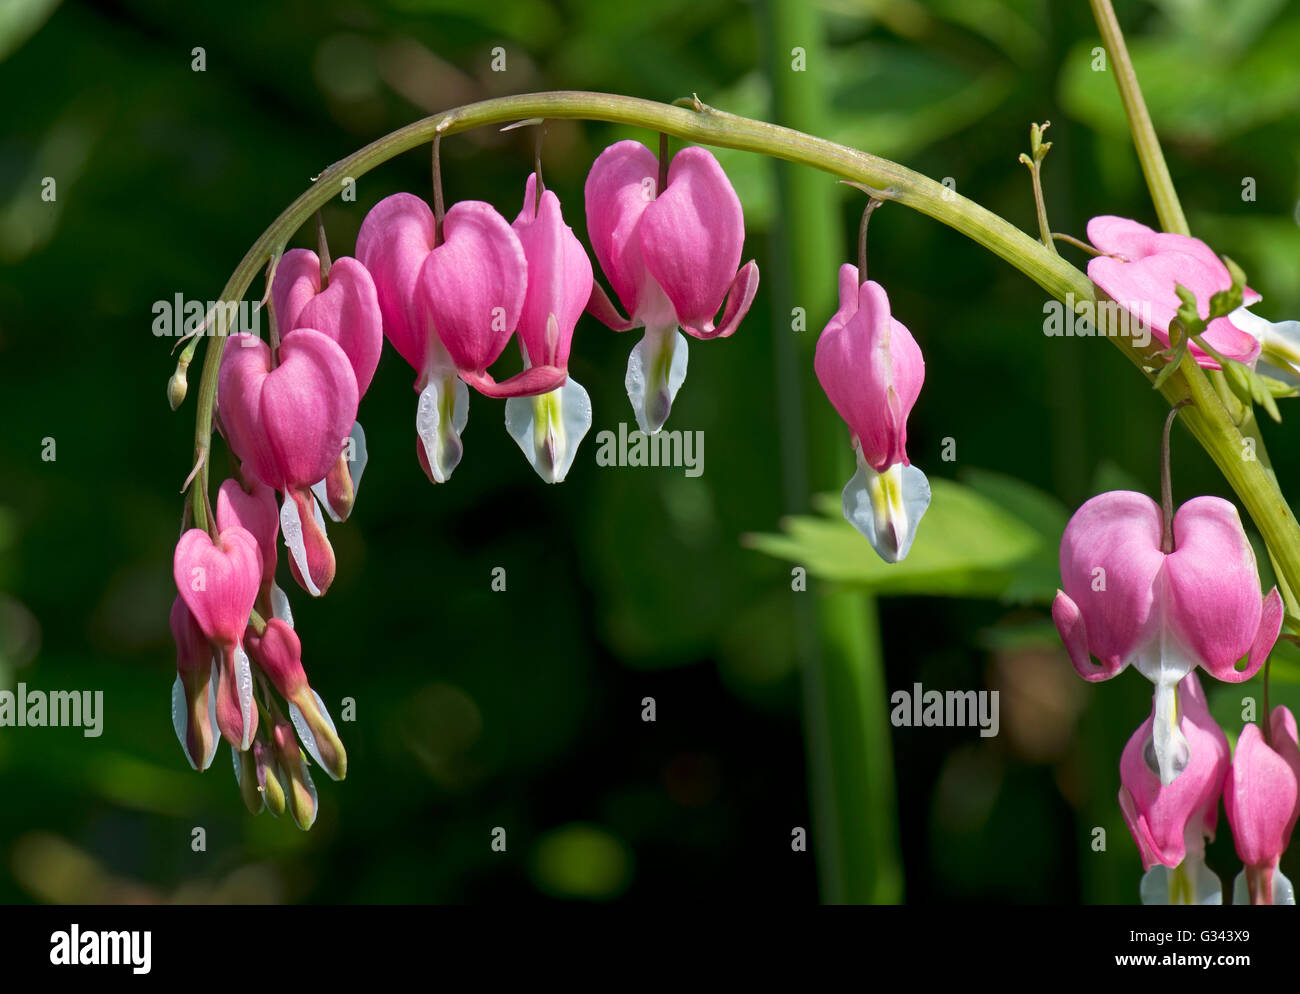 Bleeding heart or Dutchman's breeches, Lamprocapnos spectabilis, pink and white flowers, Berkshire, May Stock Photo